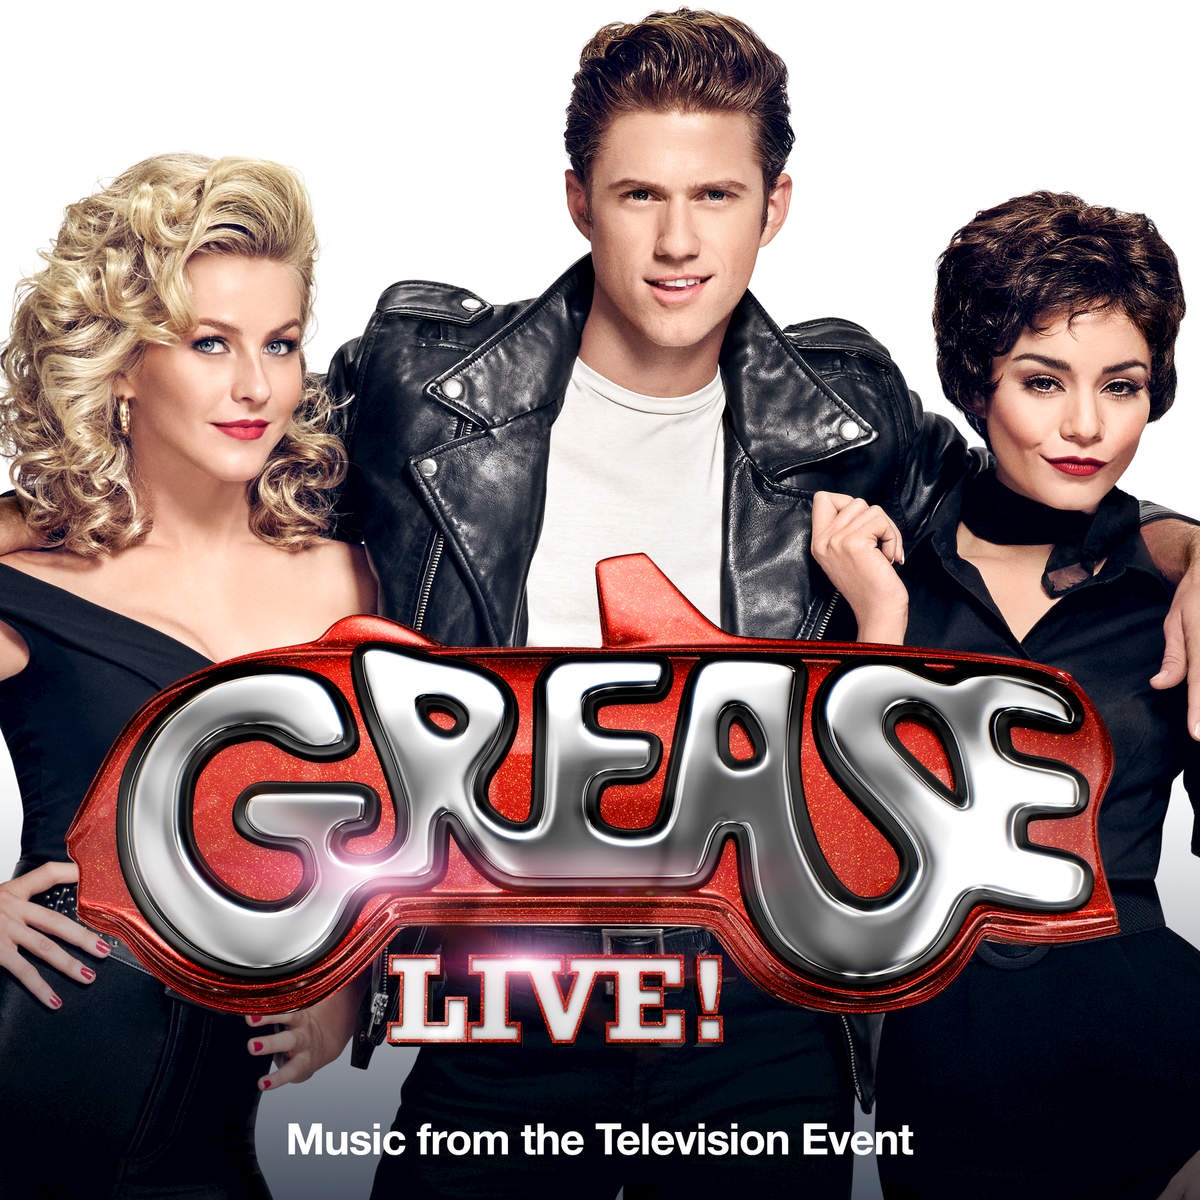 Beauty School Dropout - From "Grease Live!" Music From The Television Event